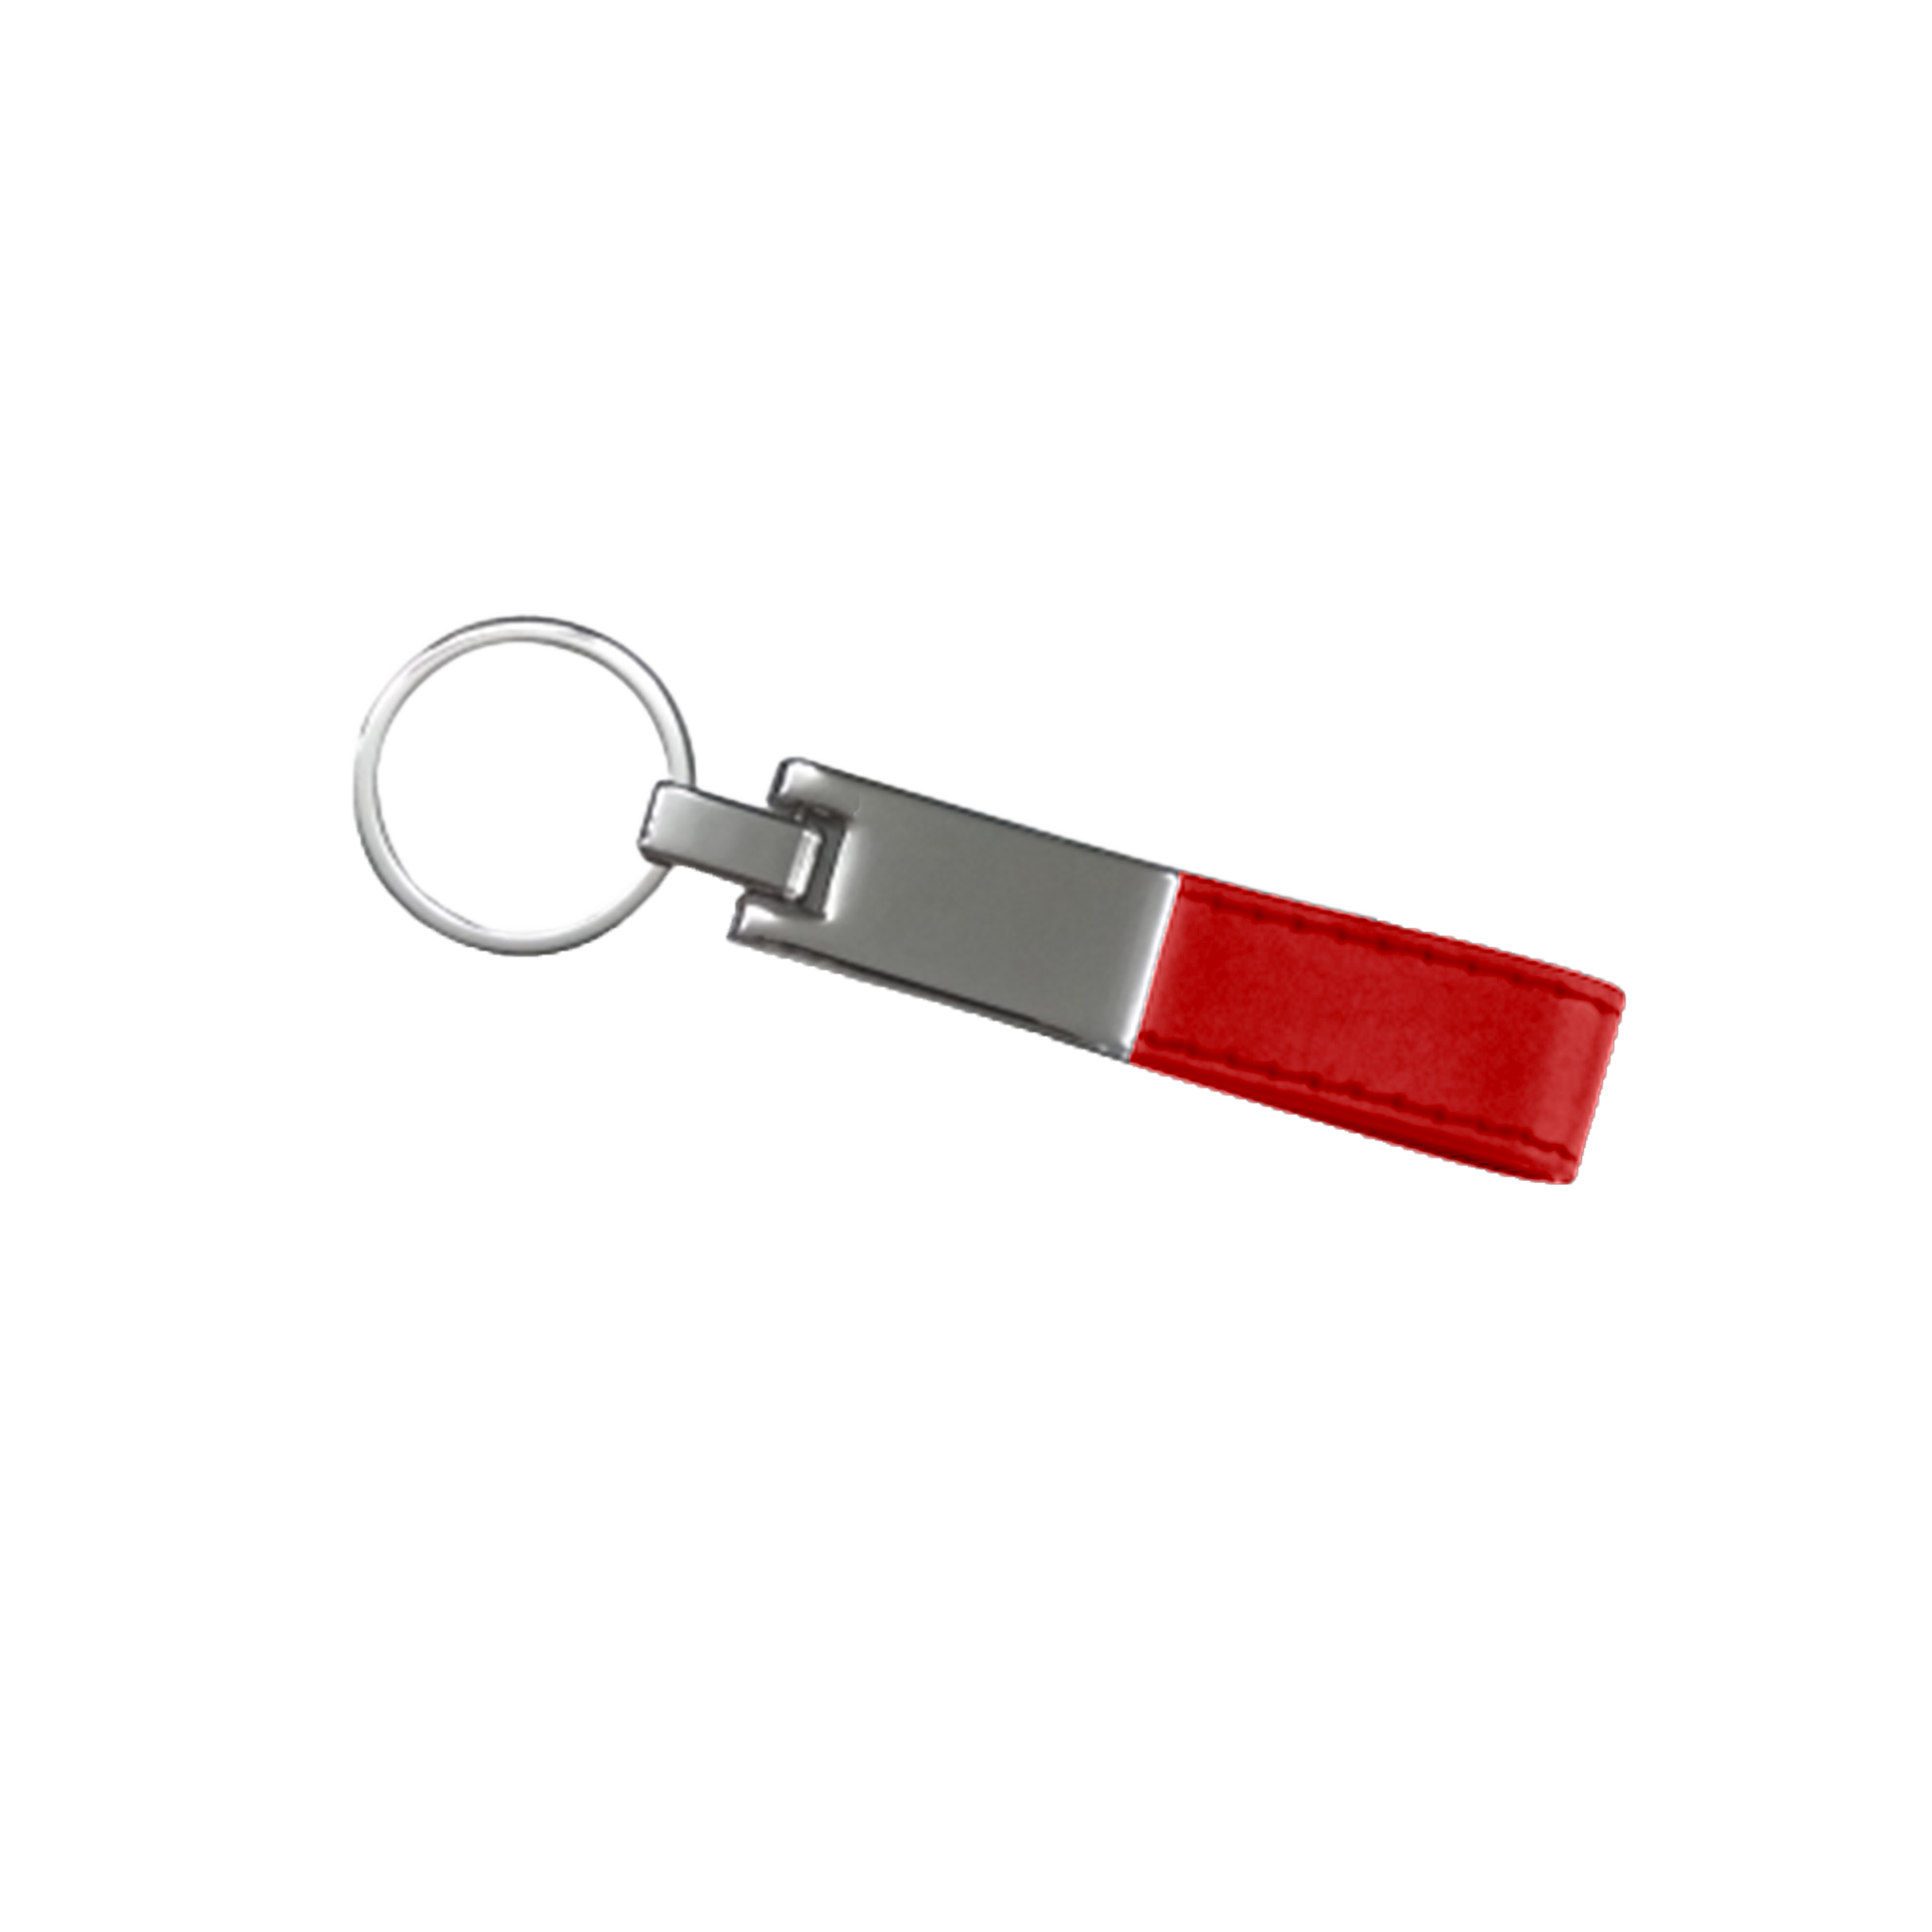 Metallic Leather Key Chain - 200 Pack - Red